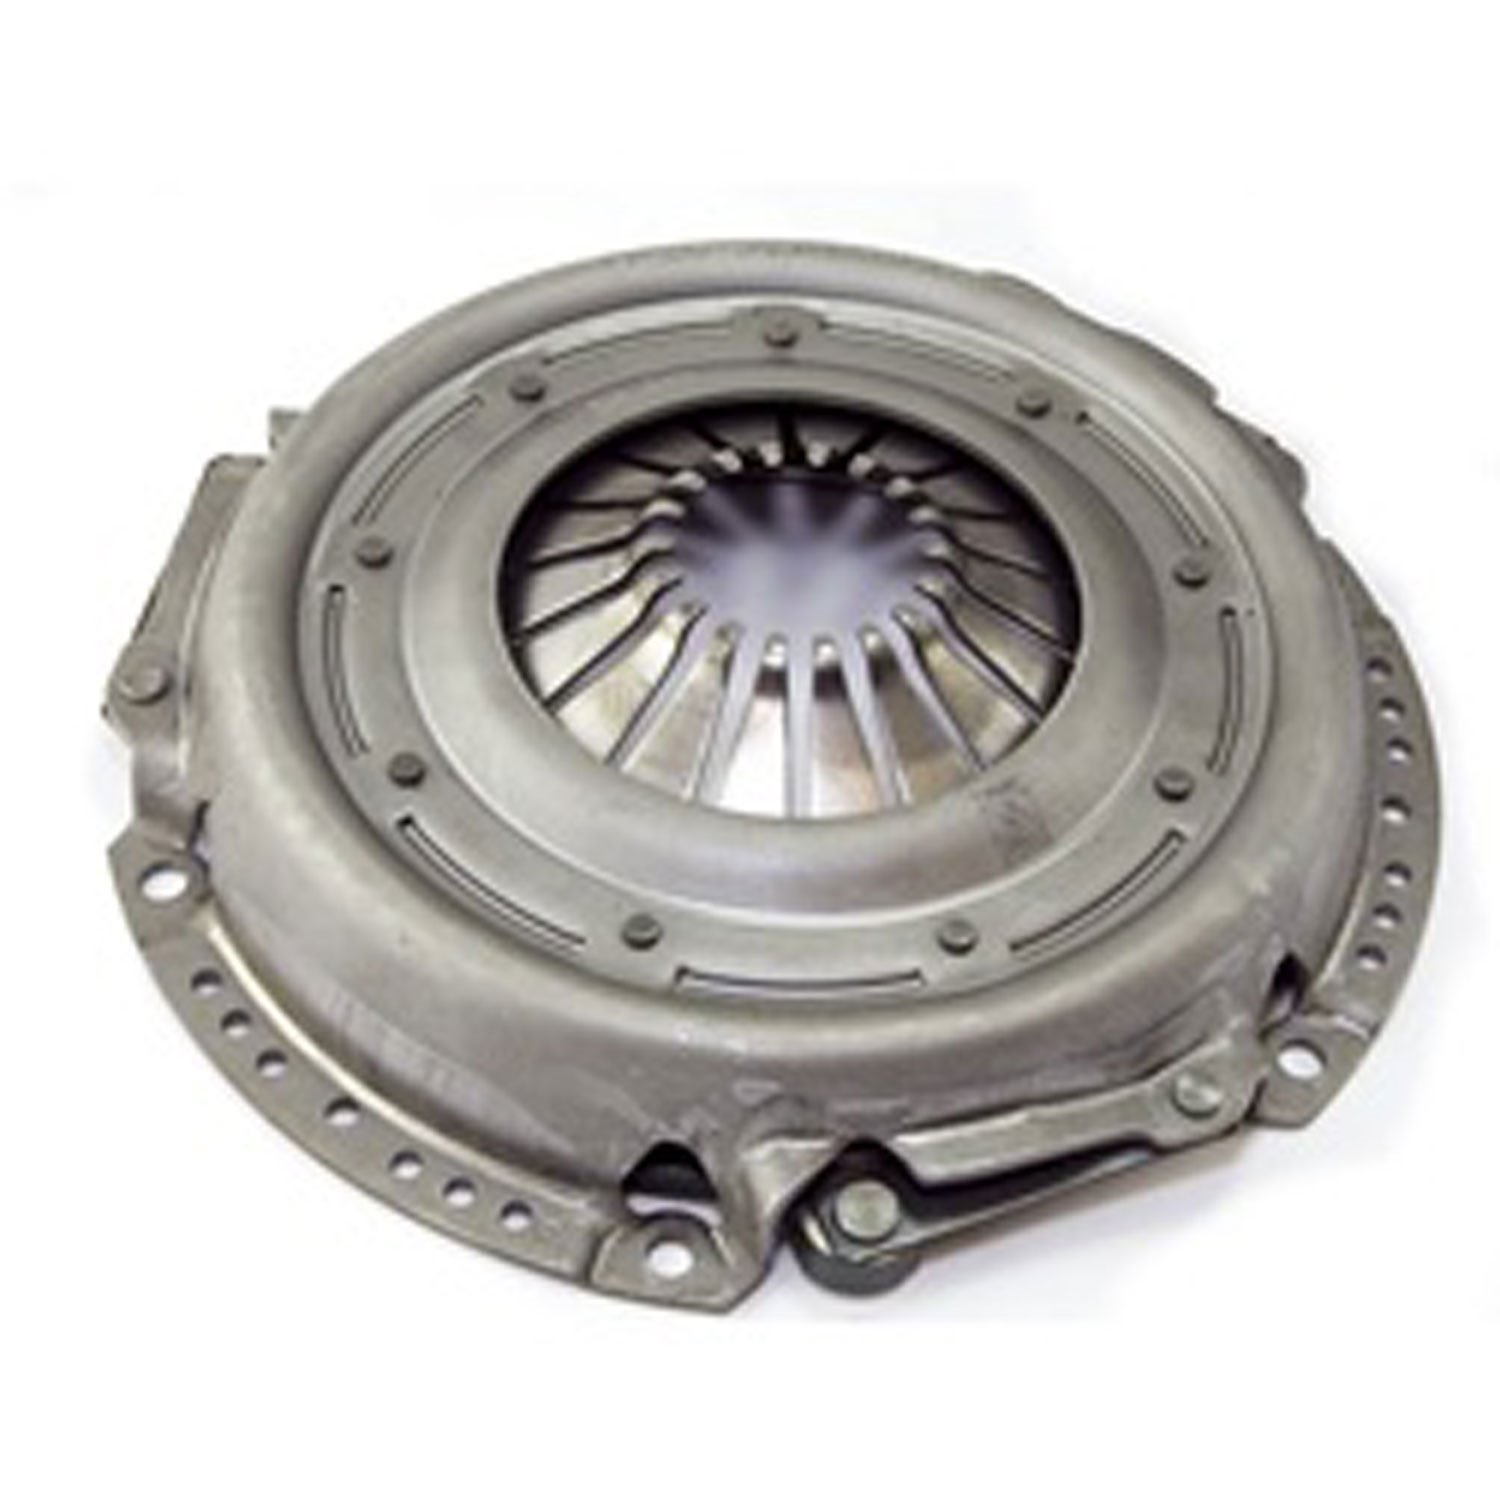 Replacement pressure plate from Omix-ADA, Fits 00-01 Jeep Cherokees and 02-06 Wranglers with a 4.0L engine.